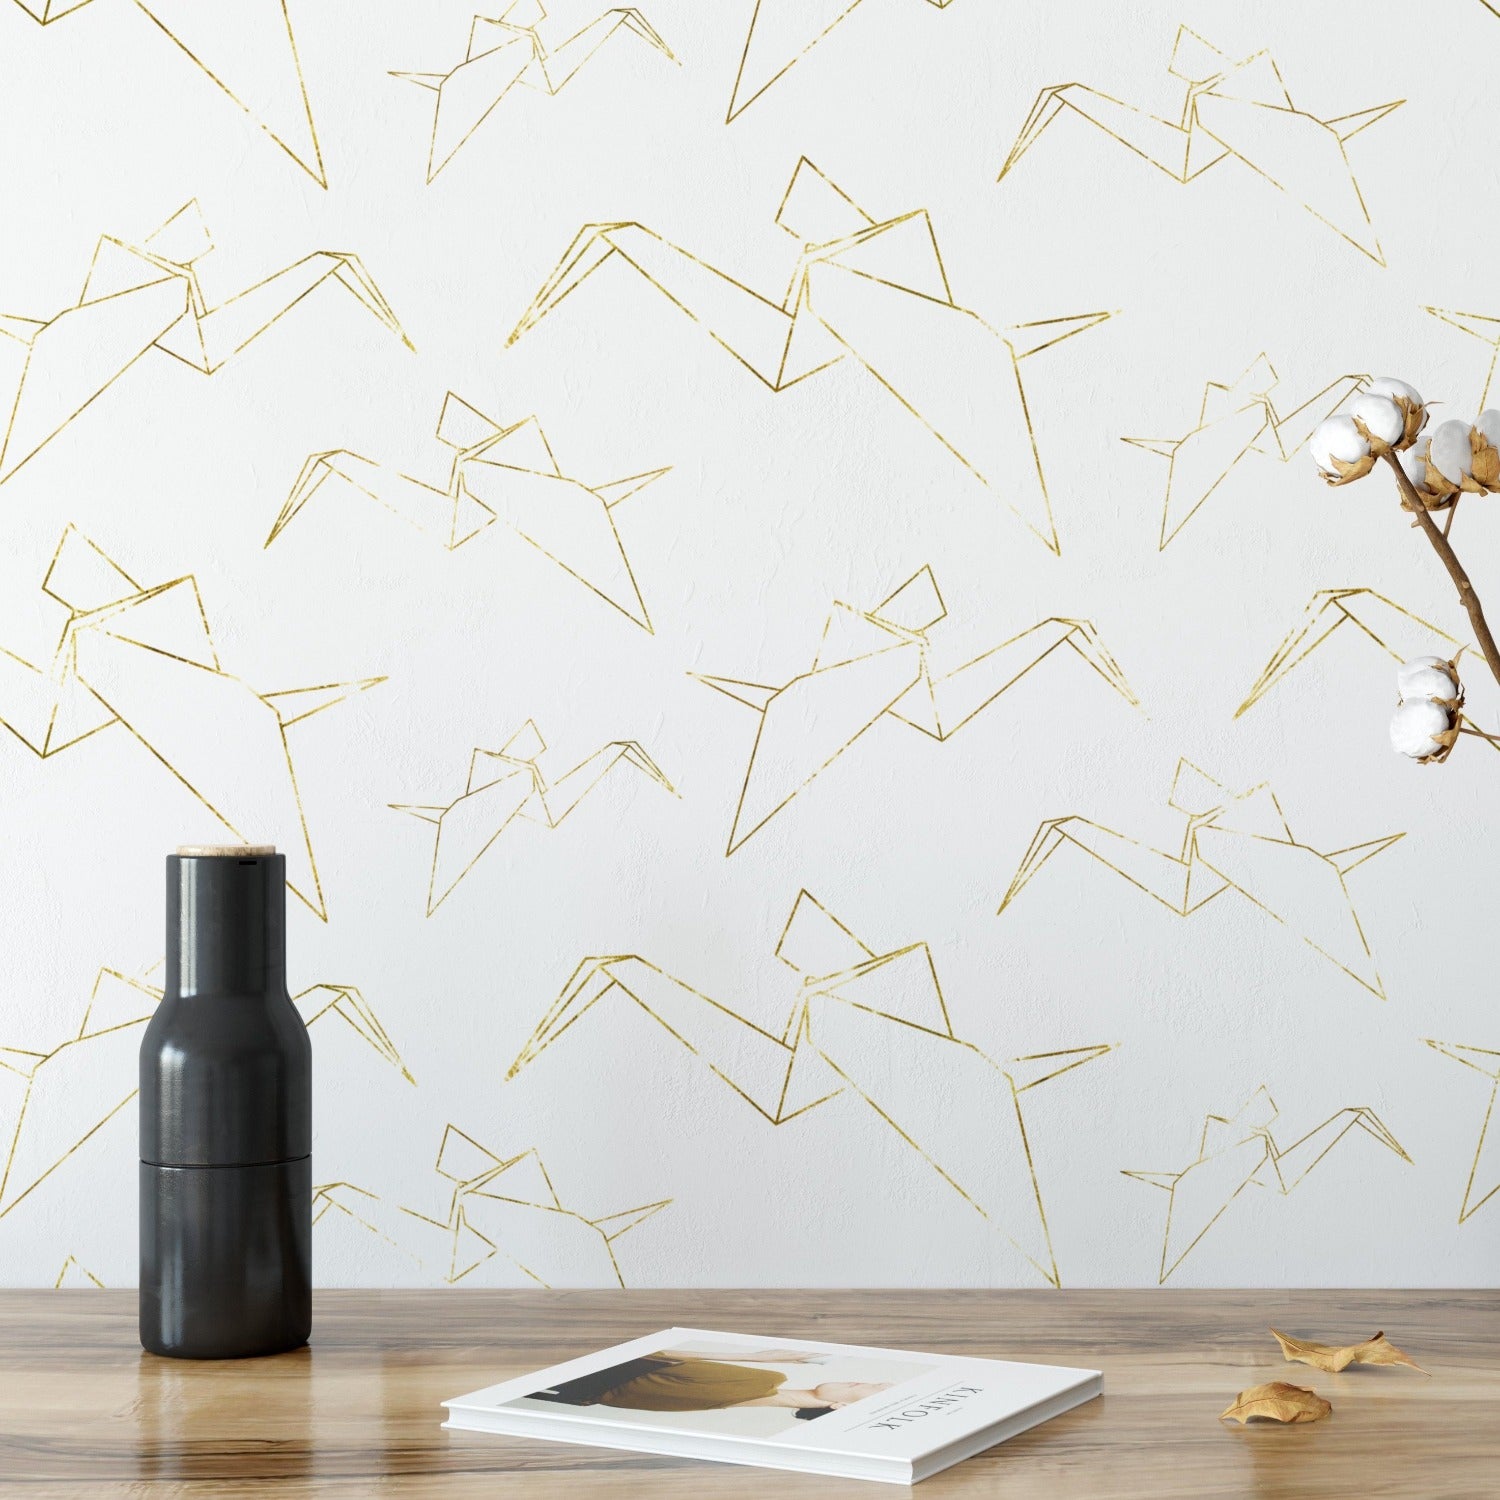 A room with white wallpaper adorned with gold origami crane patterns. The cranes are evenly spaced and create a harmonious design. A black vase and a cotton branch are placed on a wooden table in front of the wallpaper